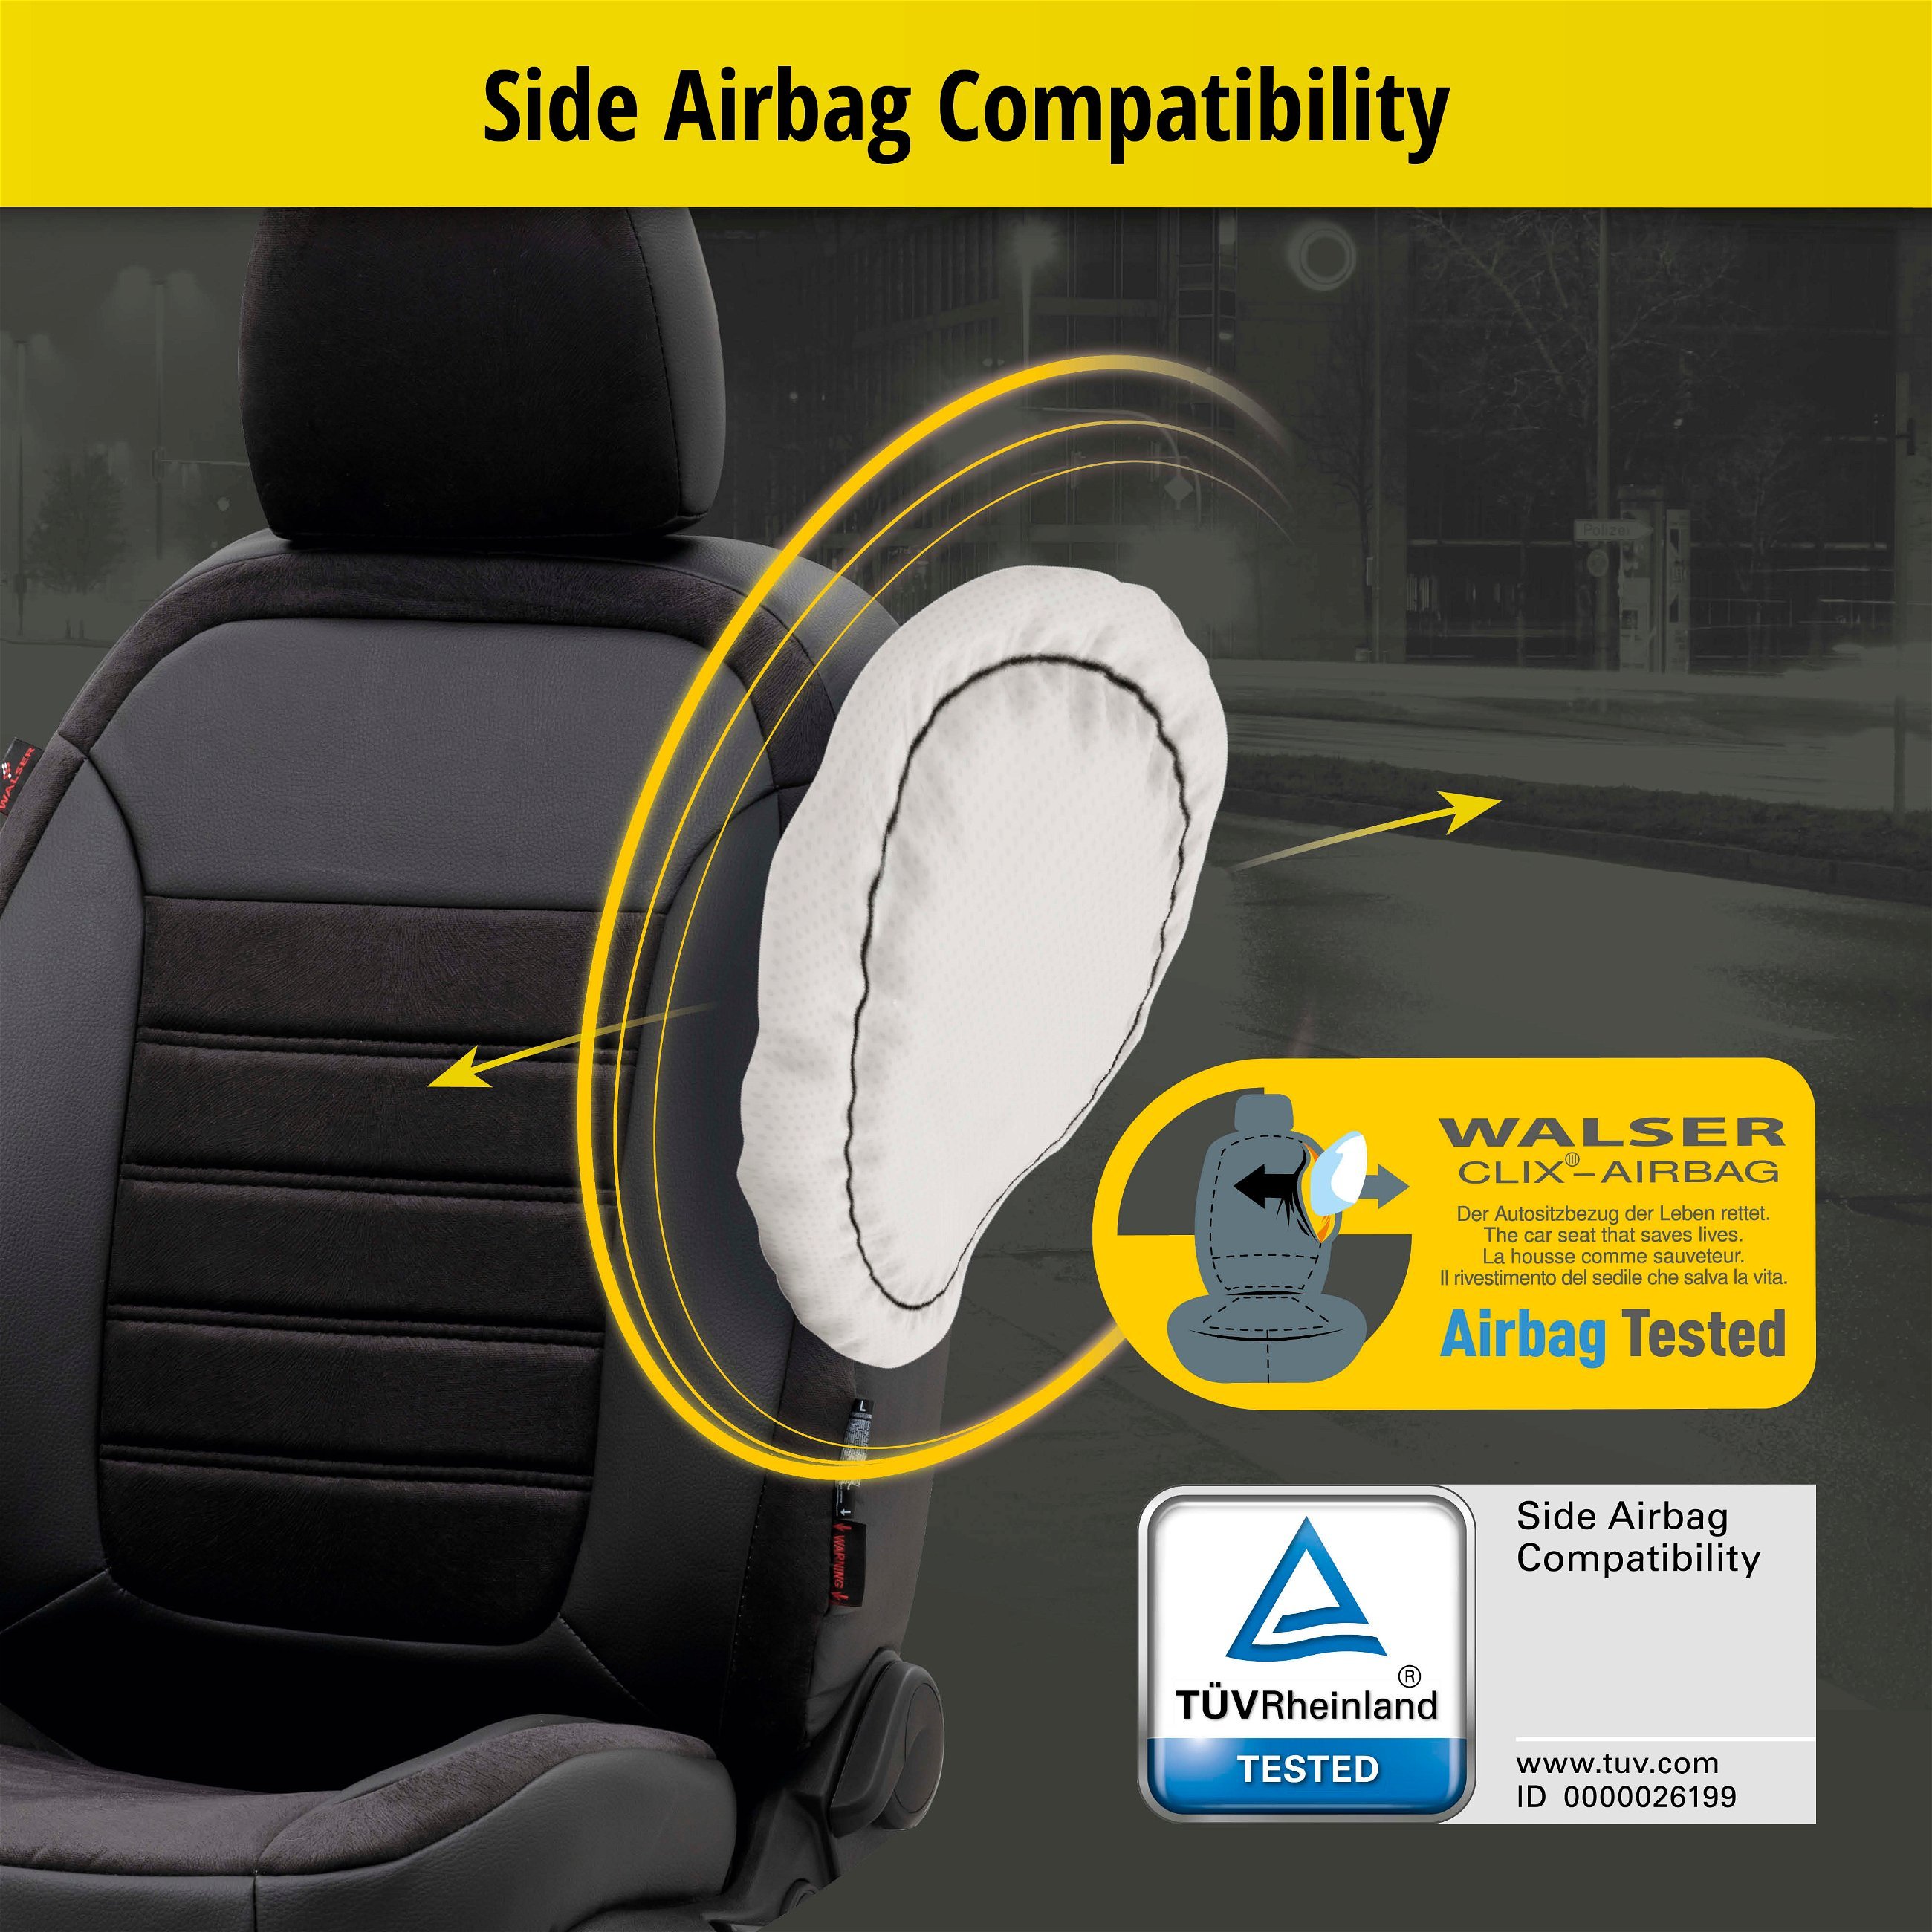 Seat Cover Bari for Citroen C3 II (SC) 09/2009-Today, 2 seat covers for normal seats